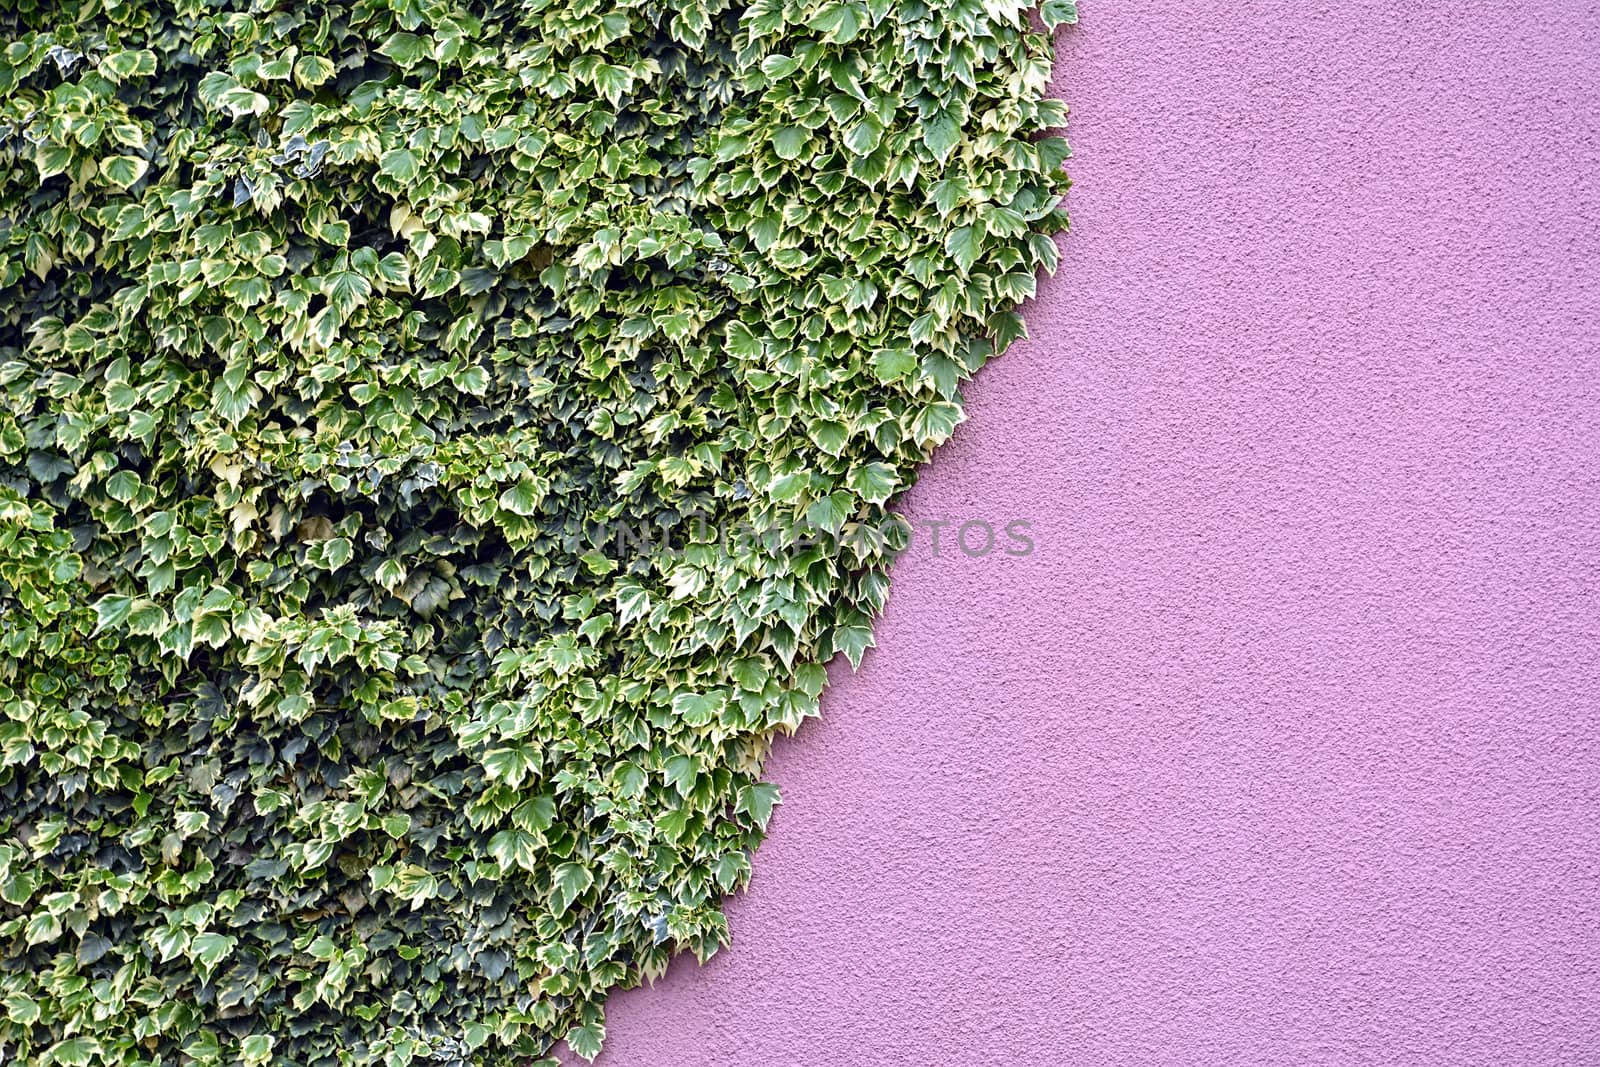 Ivy on the wall by photosampler